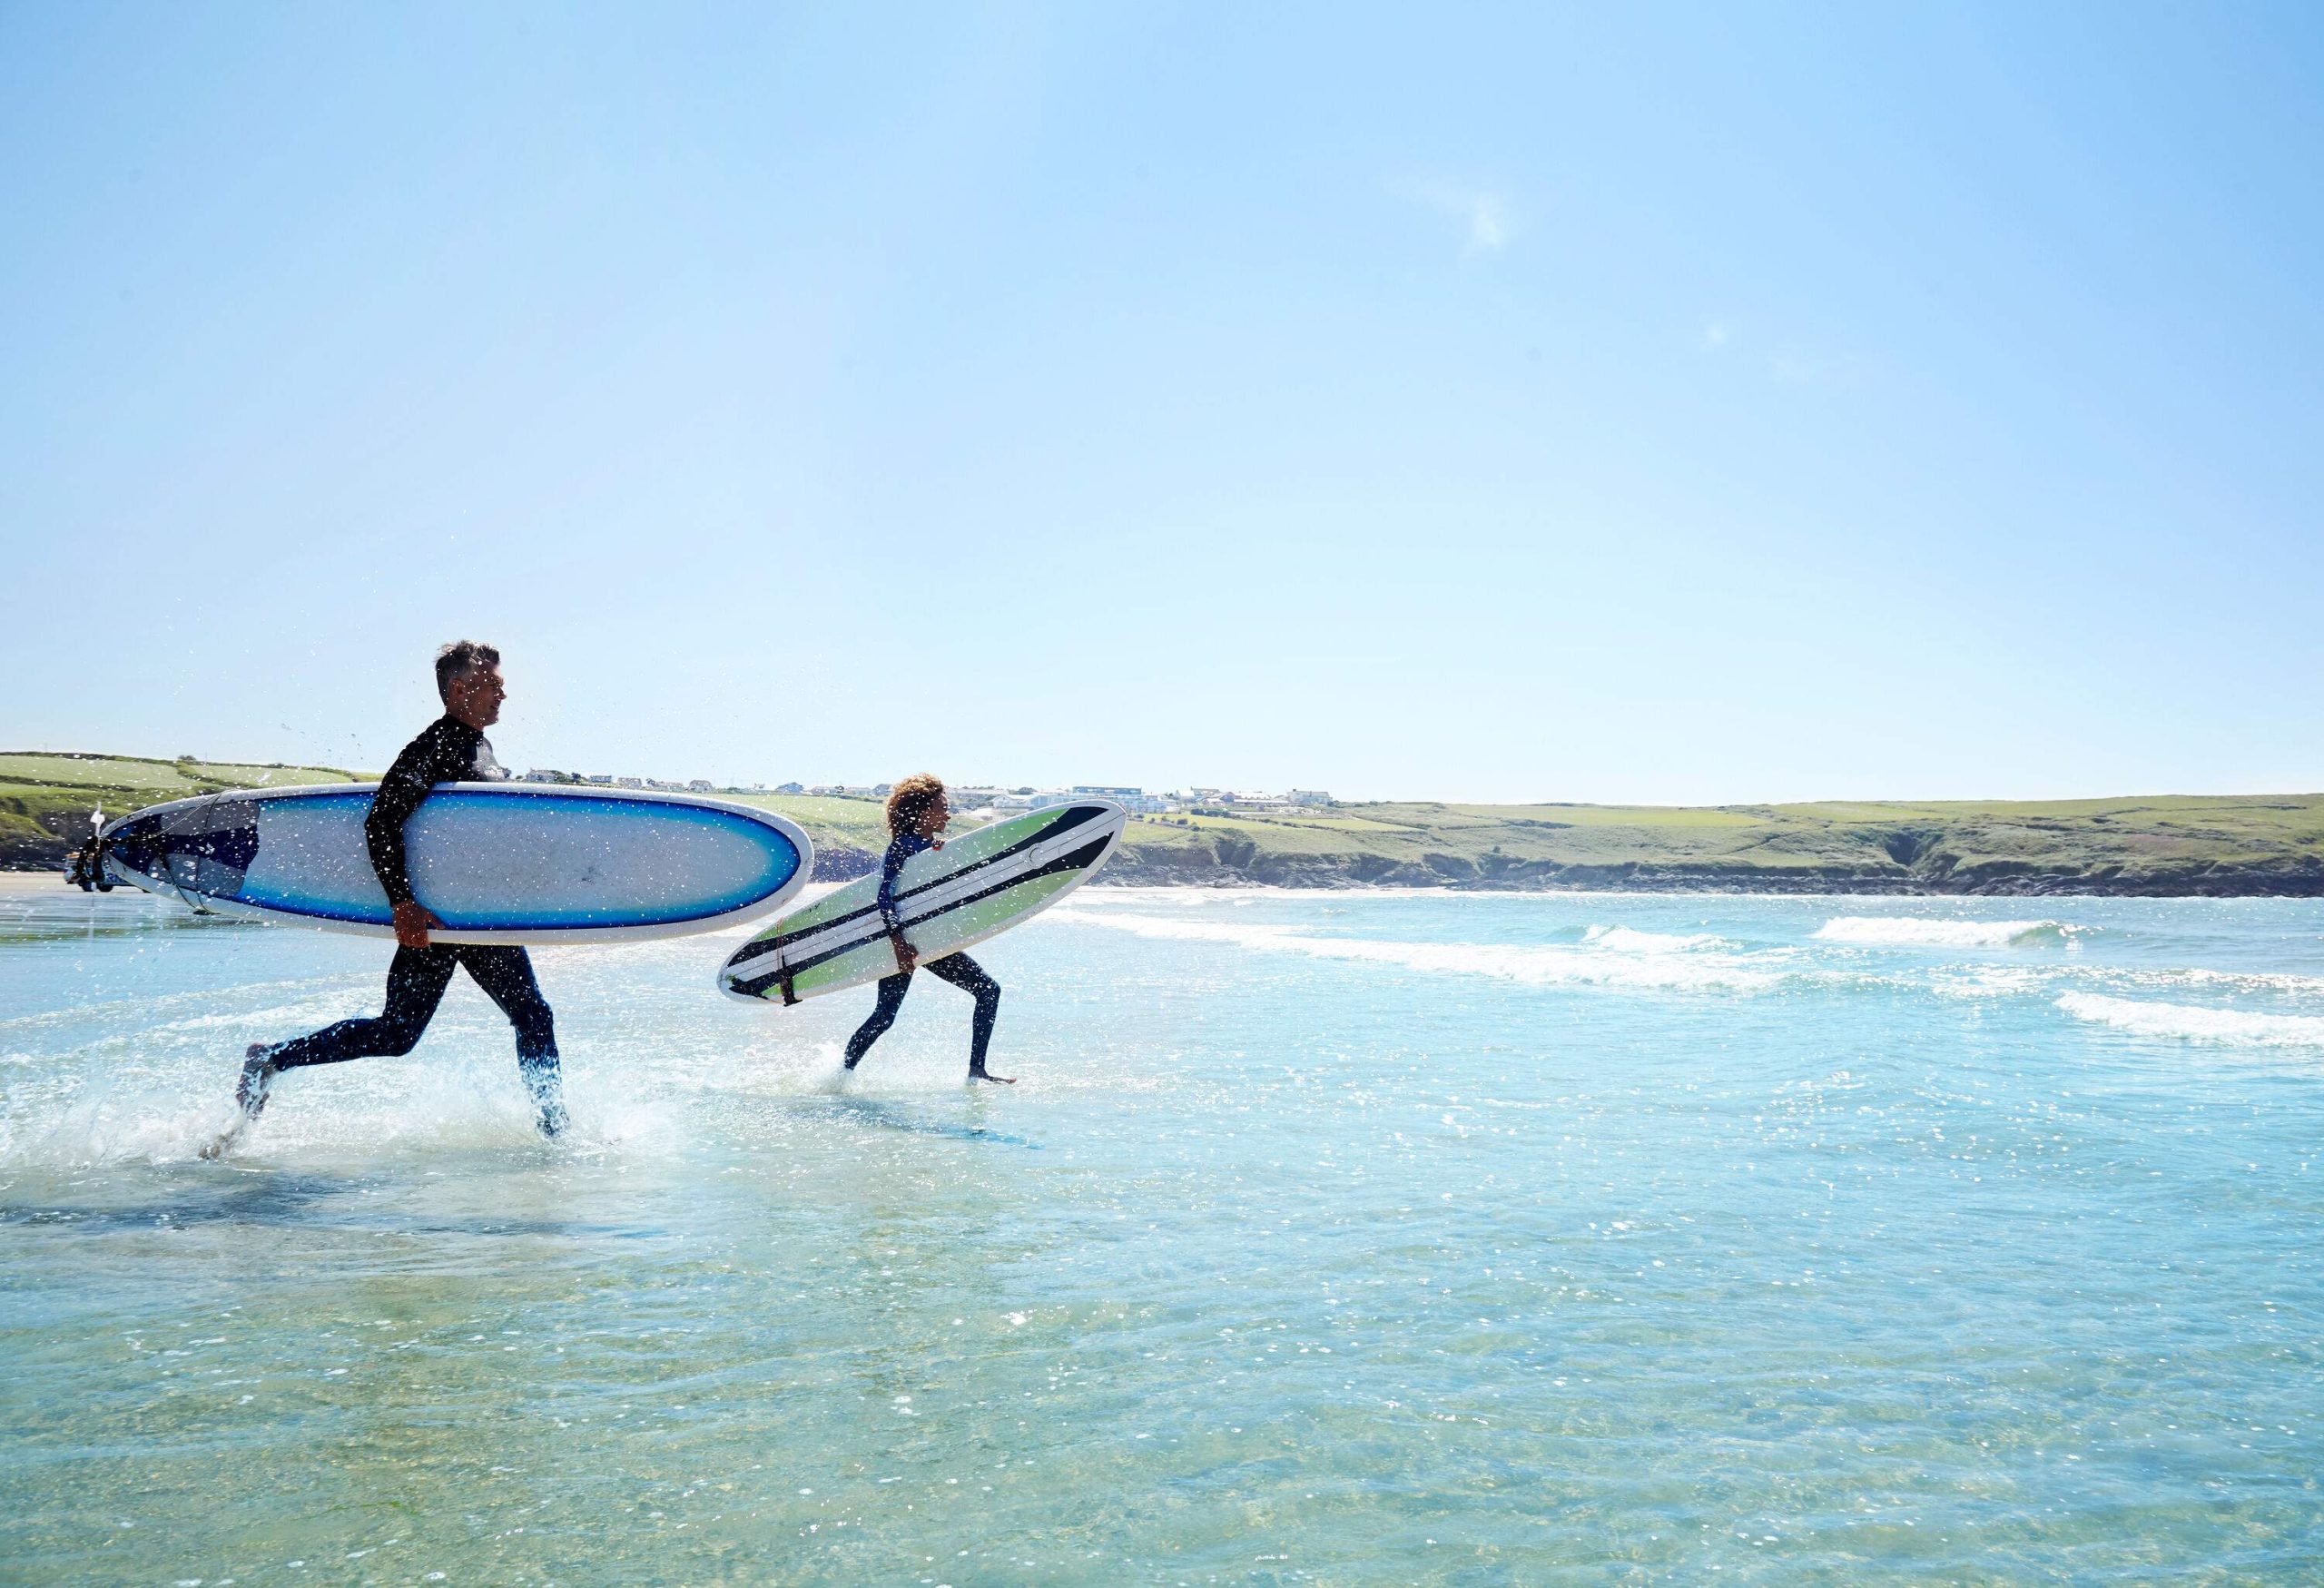 Surfers with surfboards dash into the water against a backdrop of lush terrain.